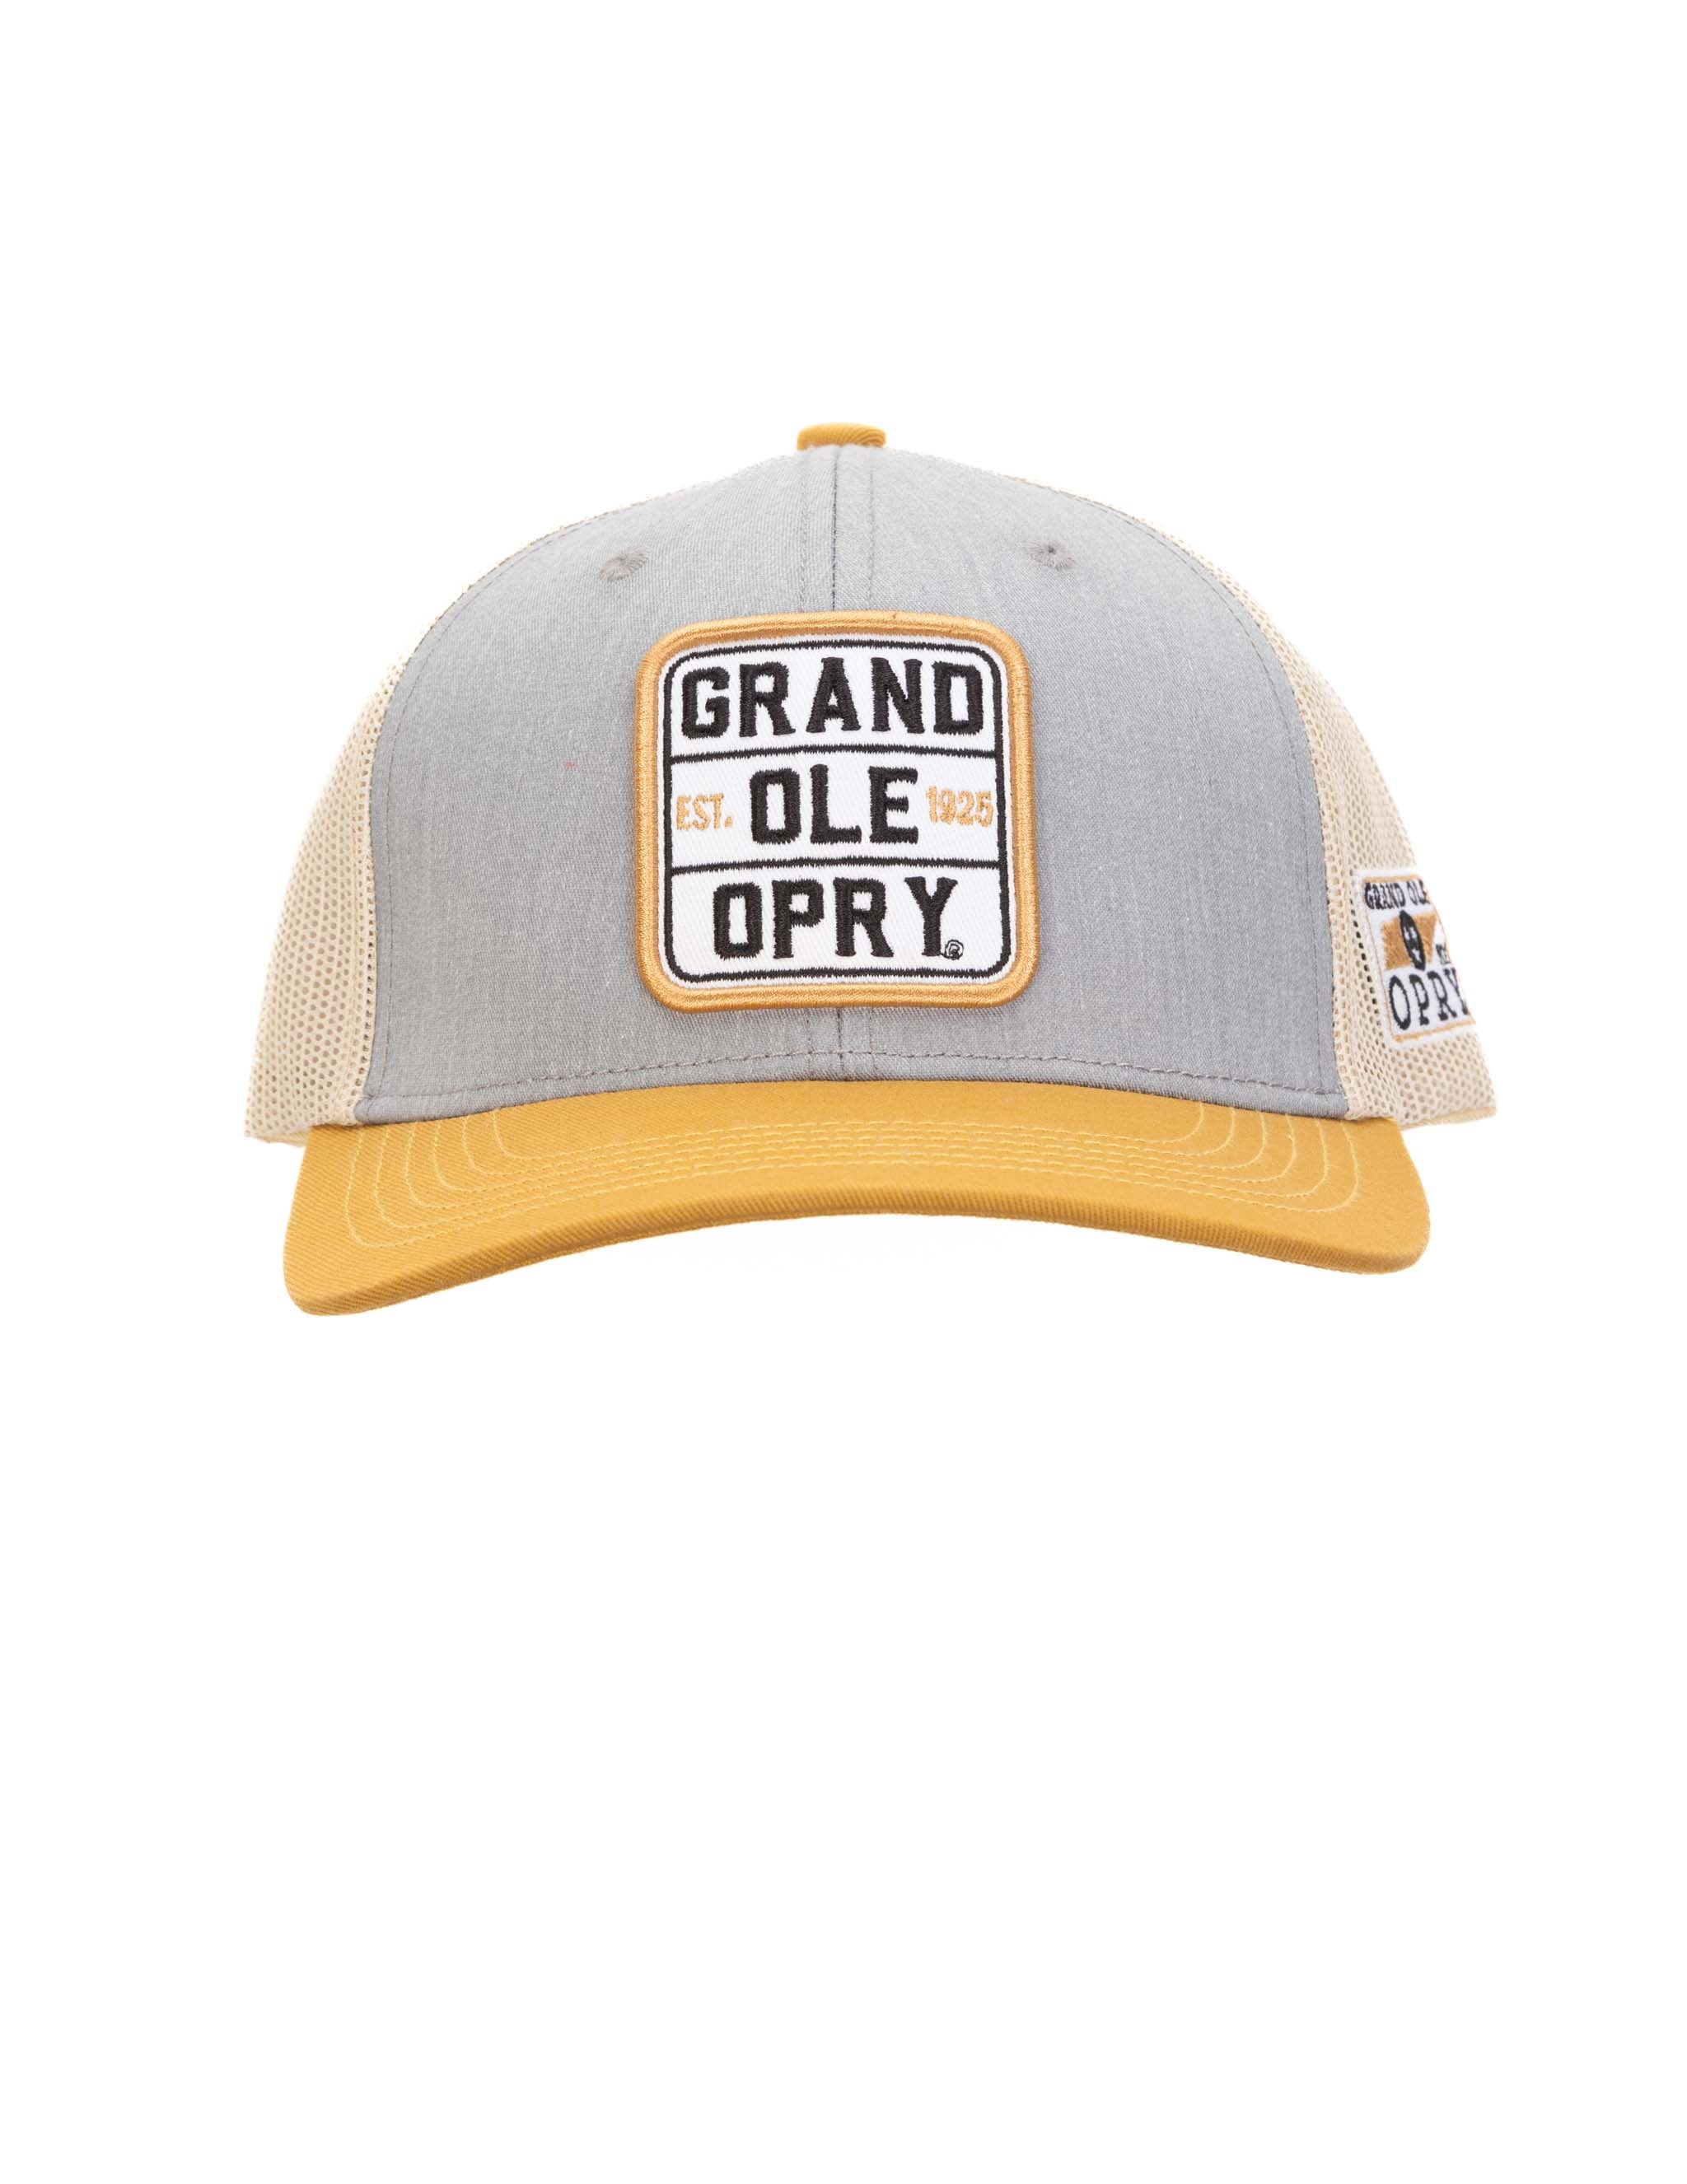 Opry Tricolor Patch Hat